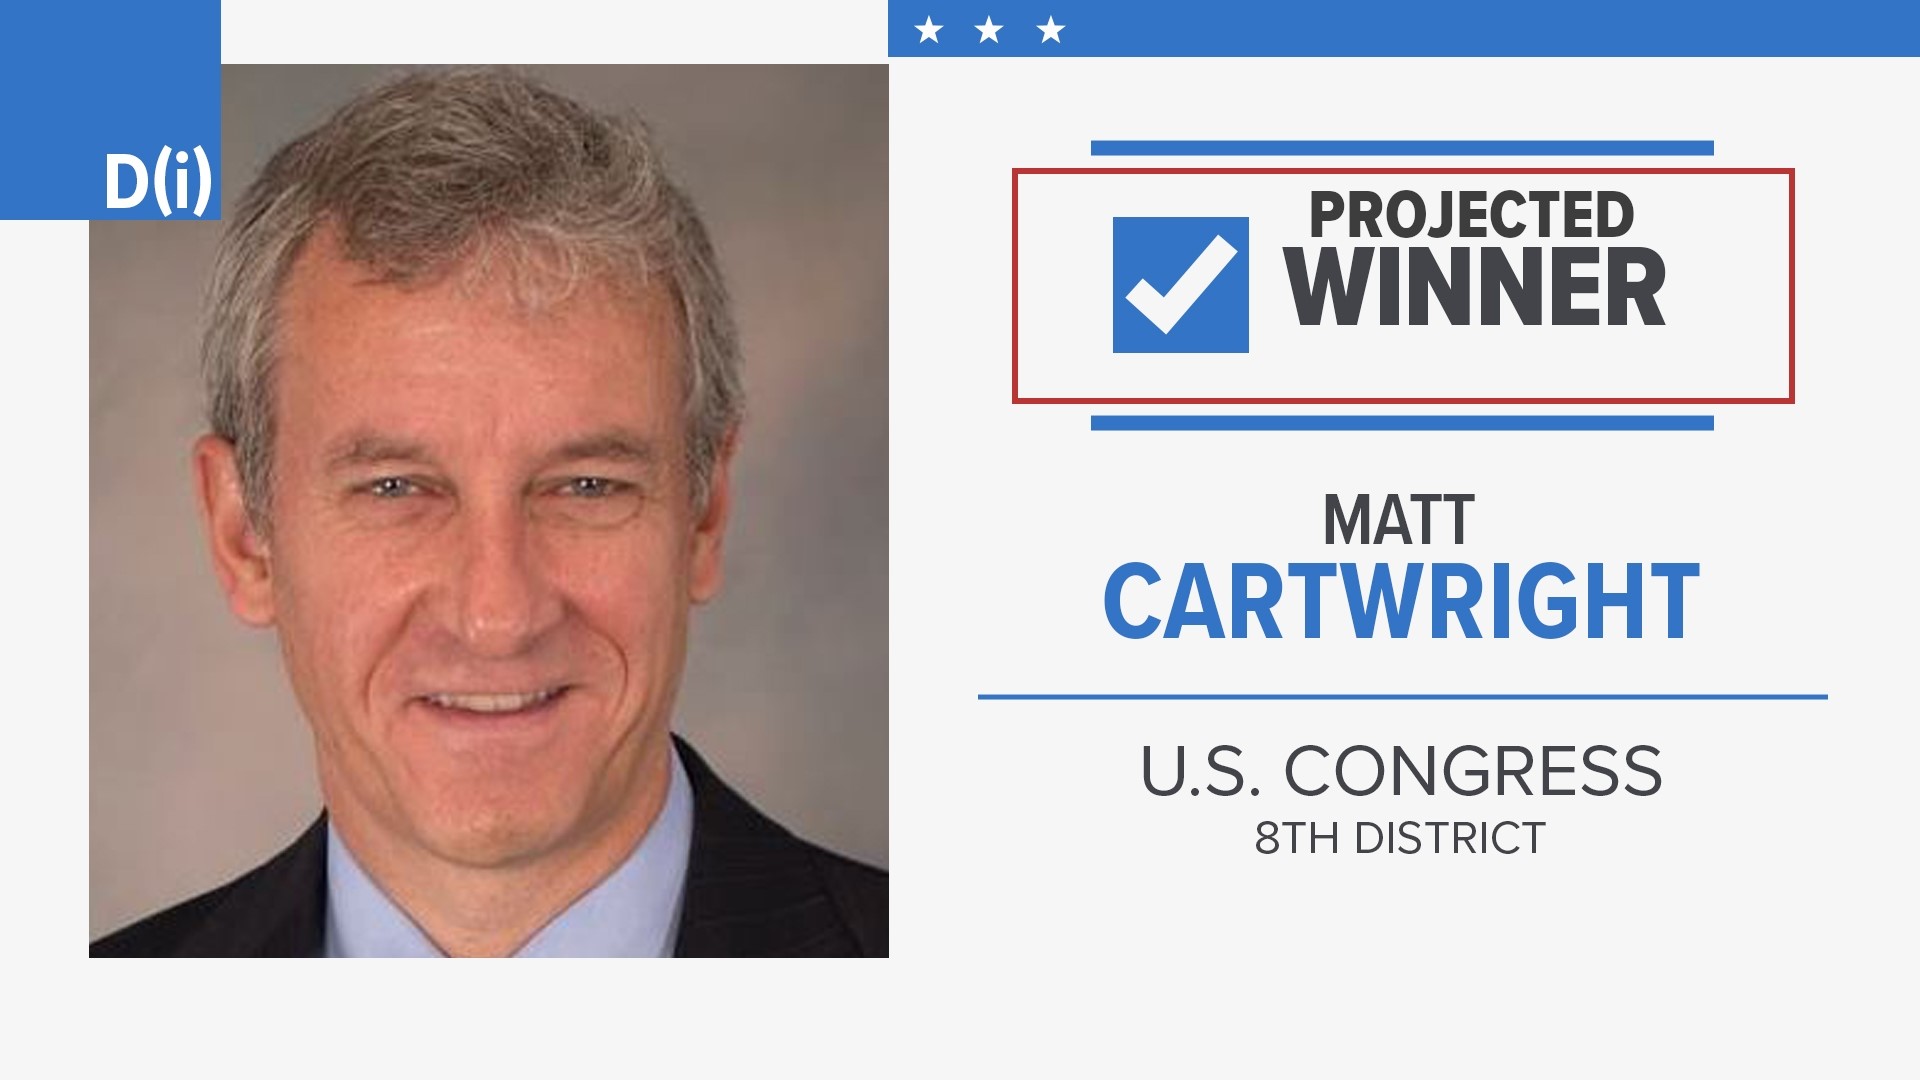 Incumbent Matt Cartwright (D) and Jim Bognet (R) were running in the general election in Pennsylvania's 8th Congressional District.